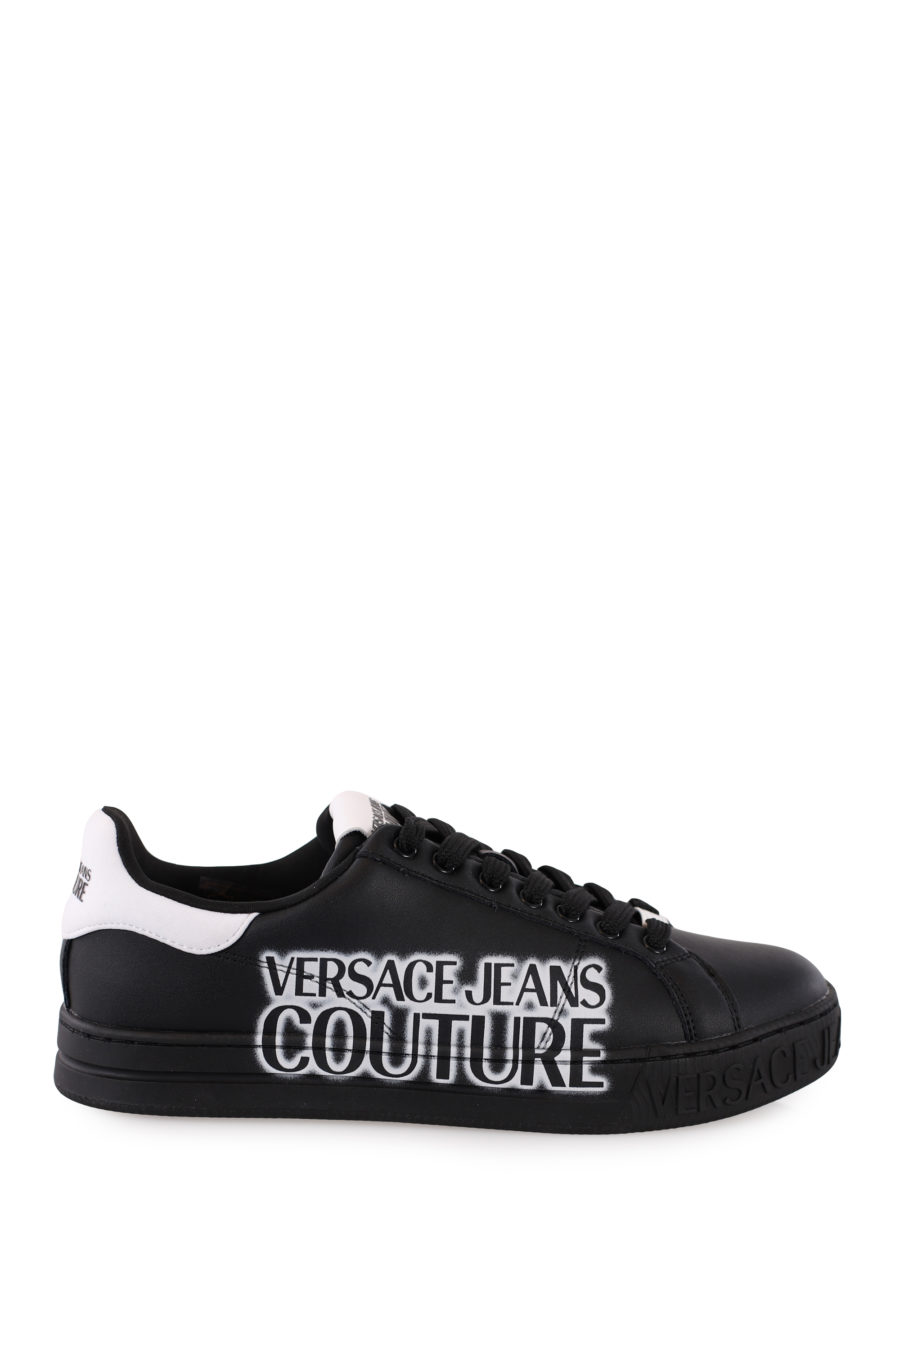 Court 88" black trainers with white logo - IMG 9063